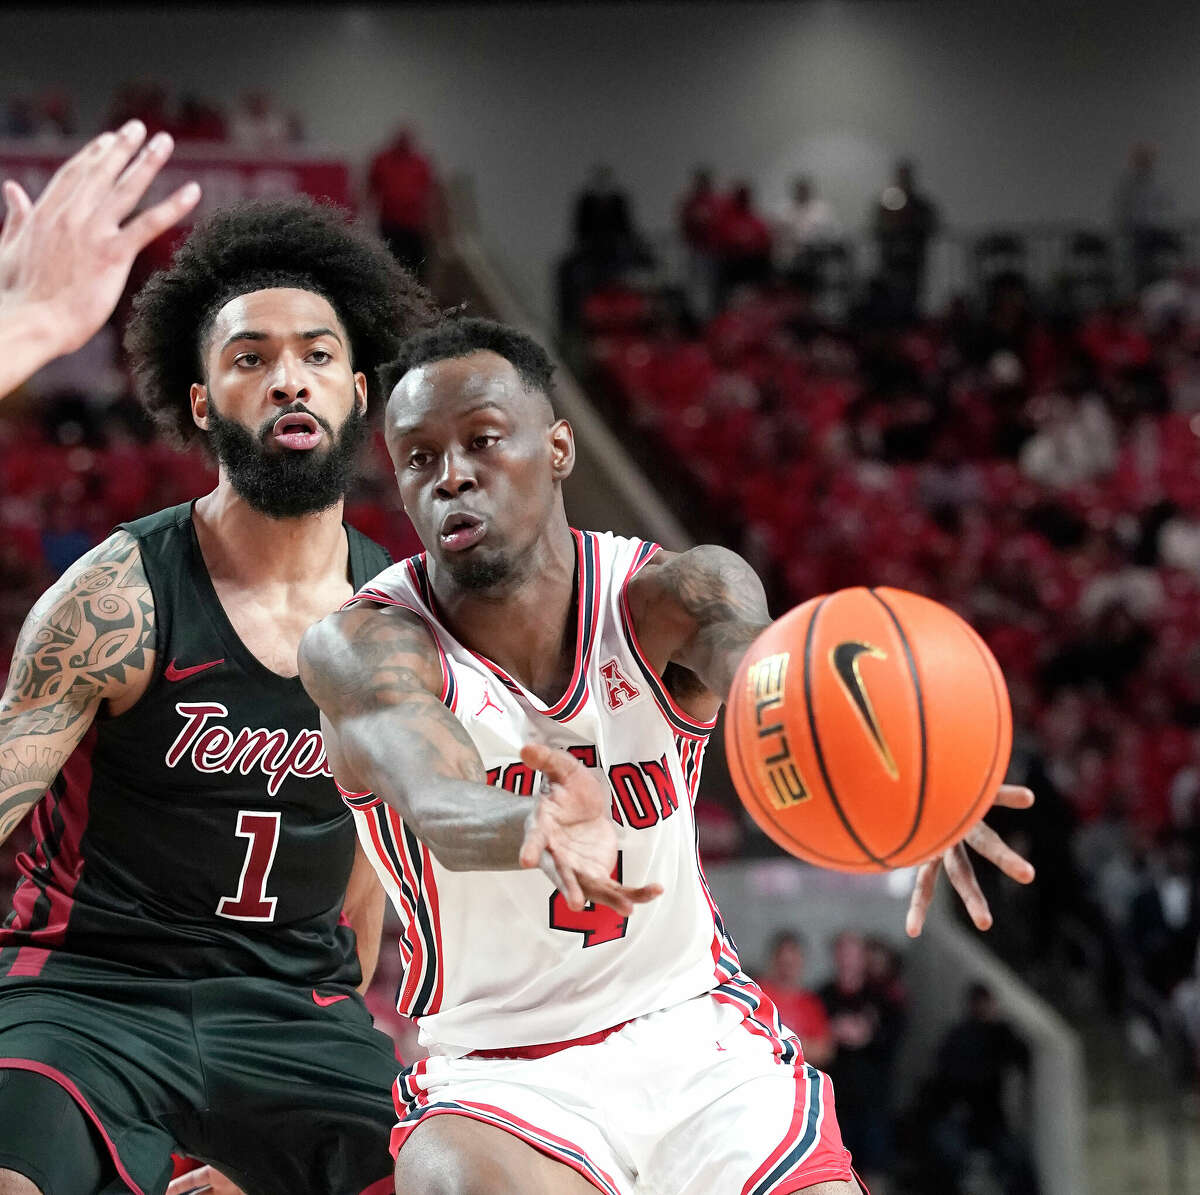 Houston Cougars guard Taze Moore (4) passes the ball against Temple Owls guard Damian Dunn (1) during the first half of a men's NCAA basketball game at Fertitta Center on the University of Houston campus on Thursday, March 3, 2022 in Houston.